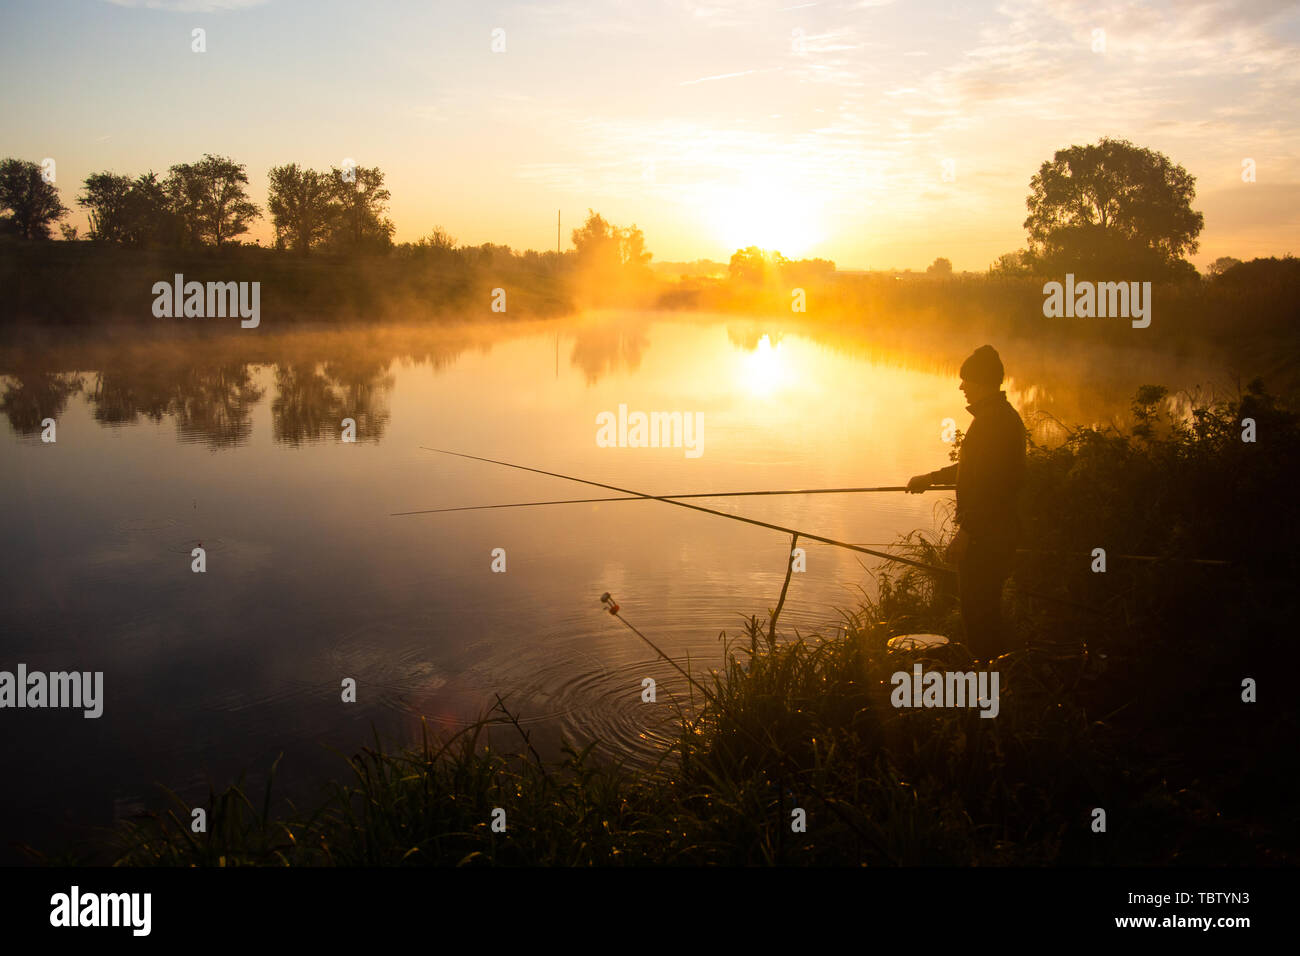 Lonely fisherman angling at foggy lake in the early morning just after golden sunrise. Stock Photo